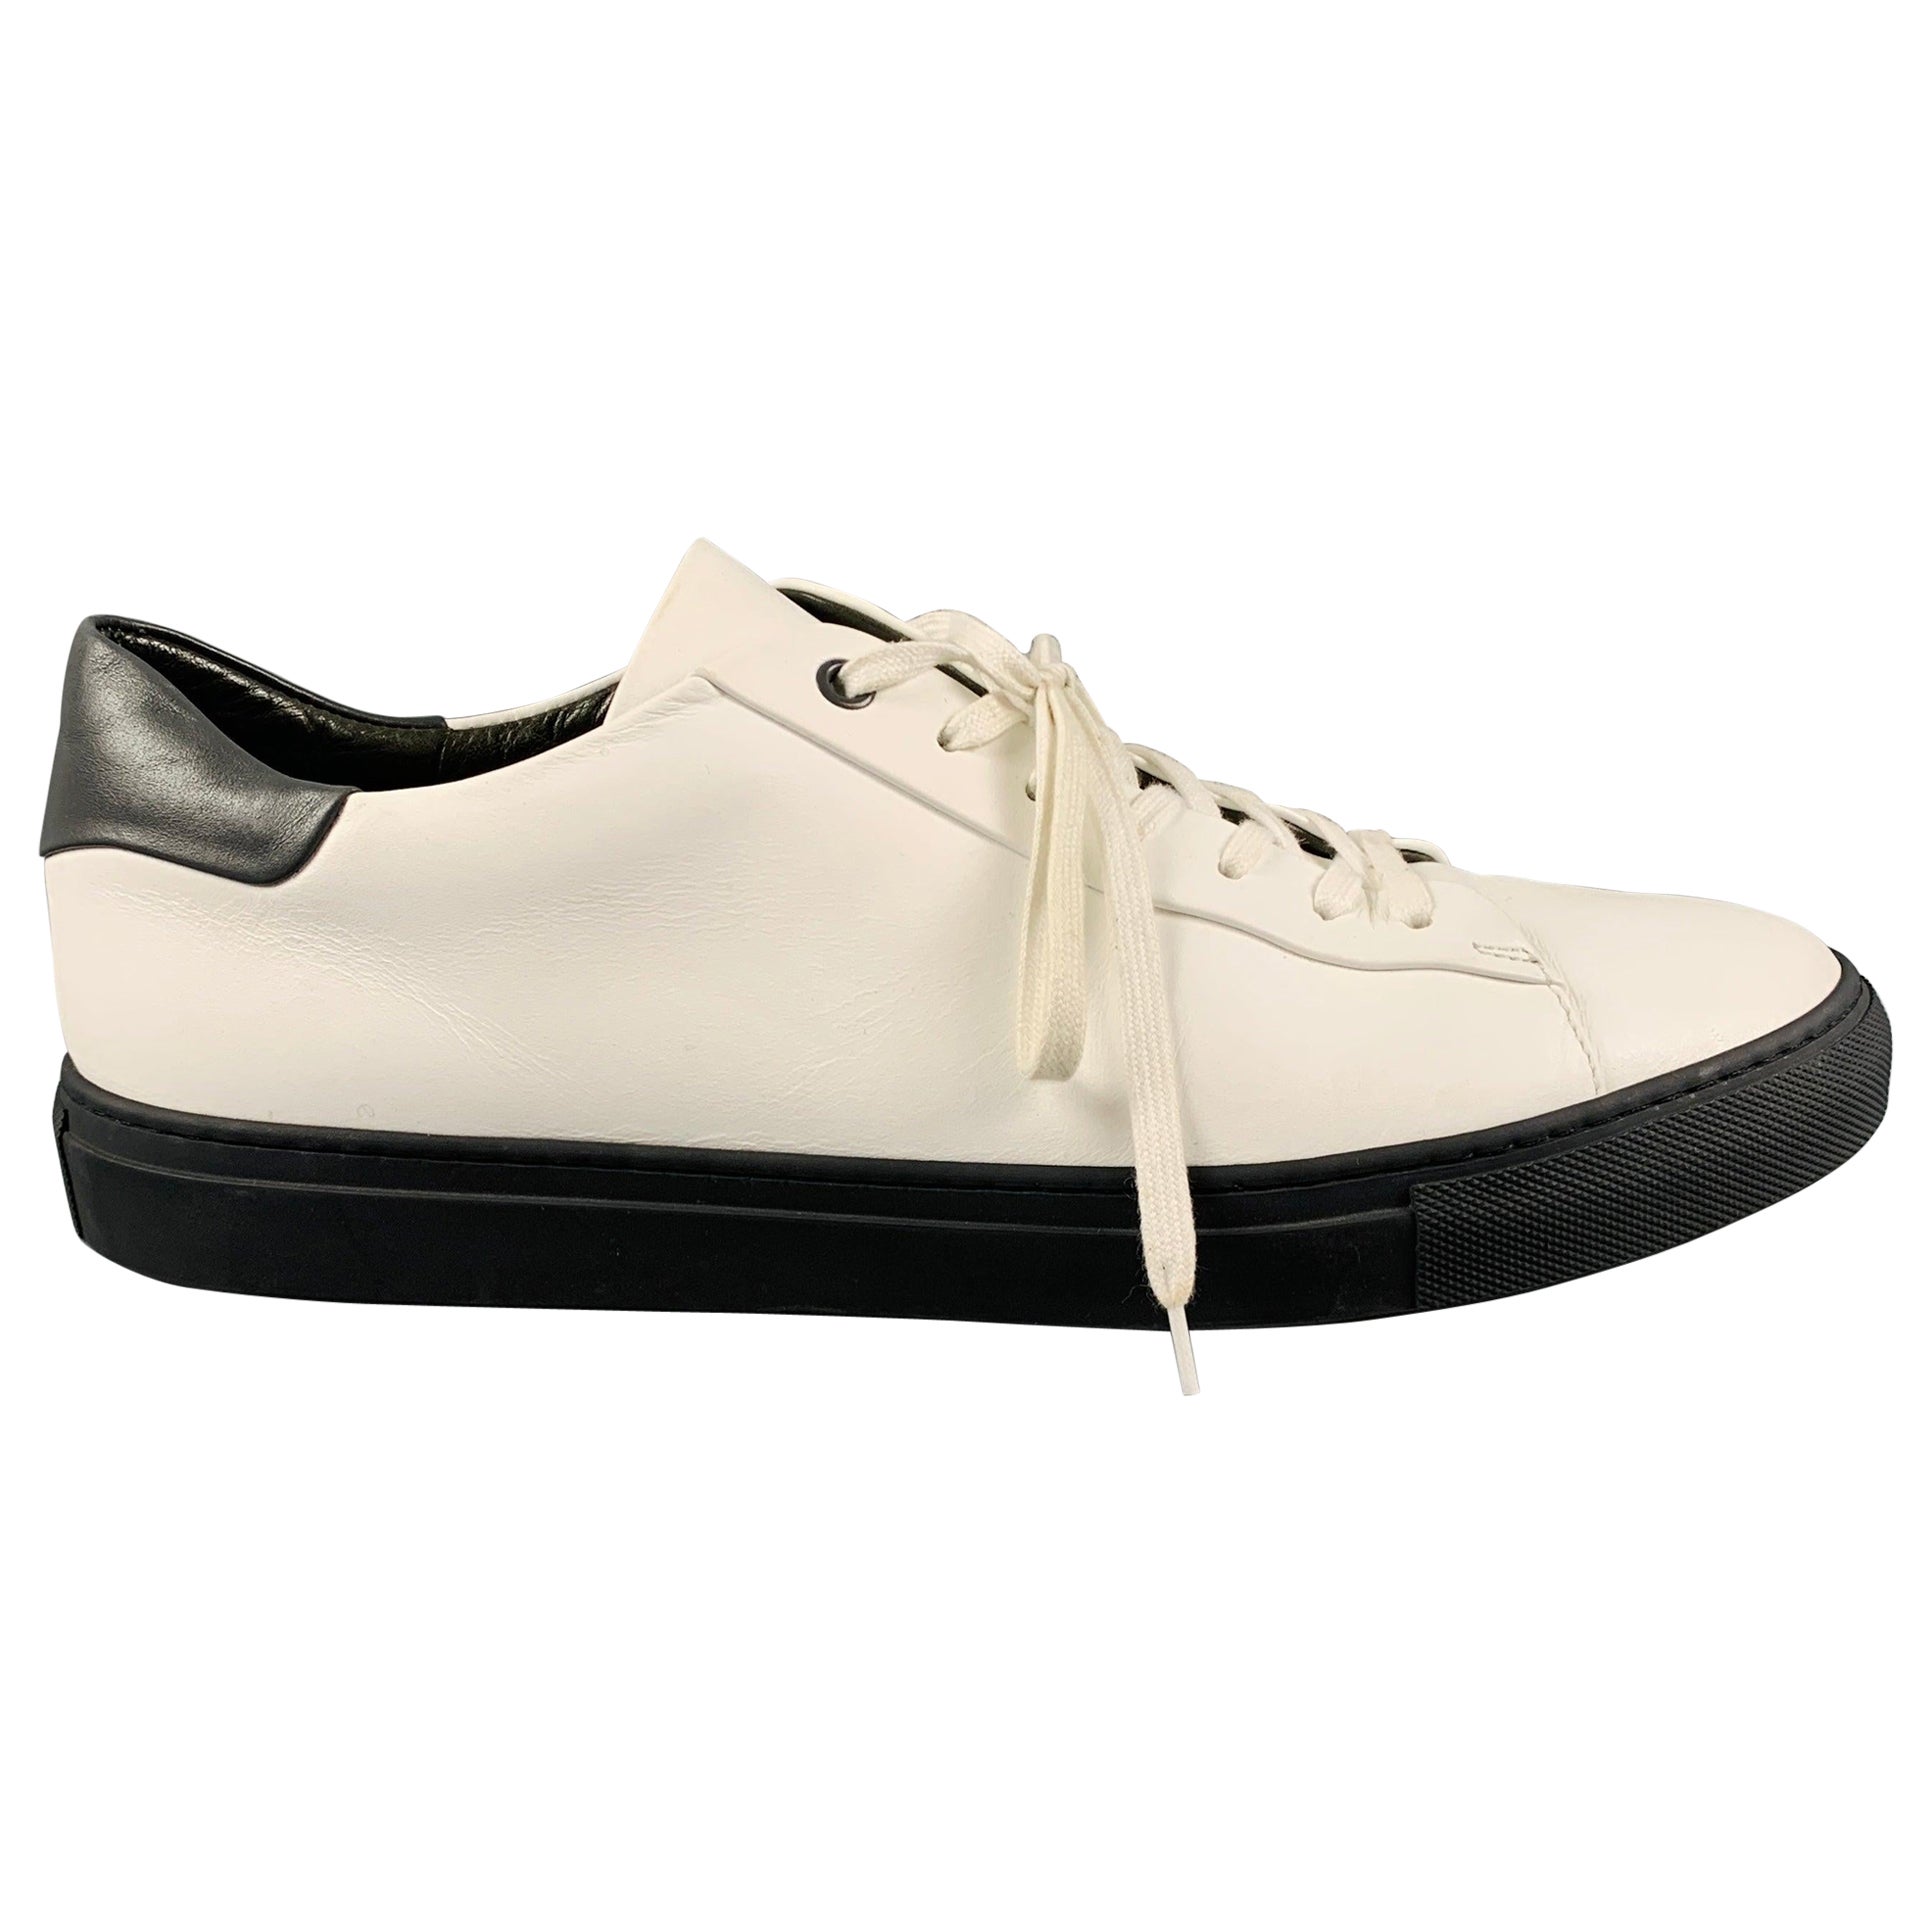 SAKS FIFTH AVENUE Size 12 White Black Leather Low Top Lace-Up Shoes For Sale